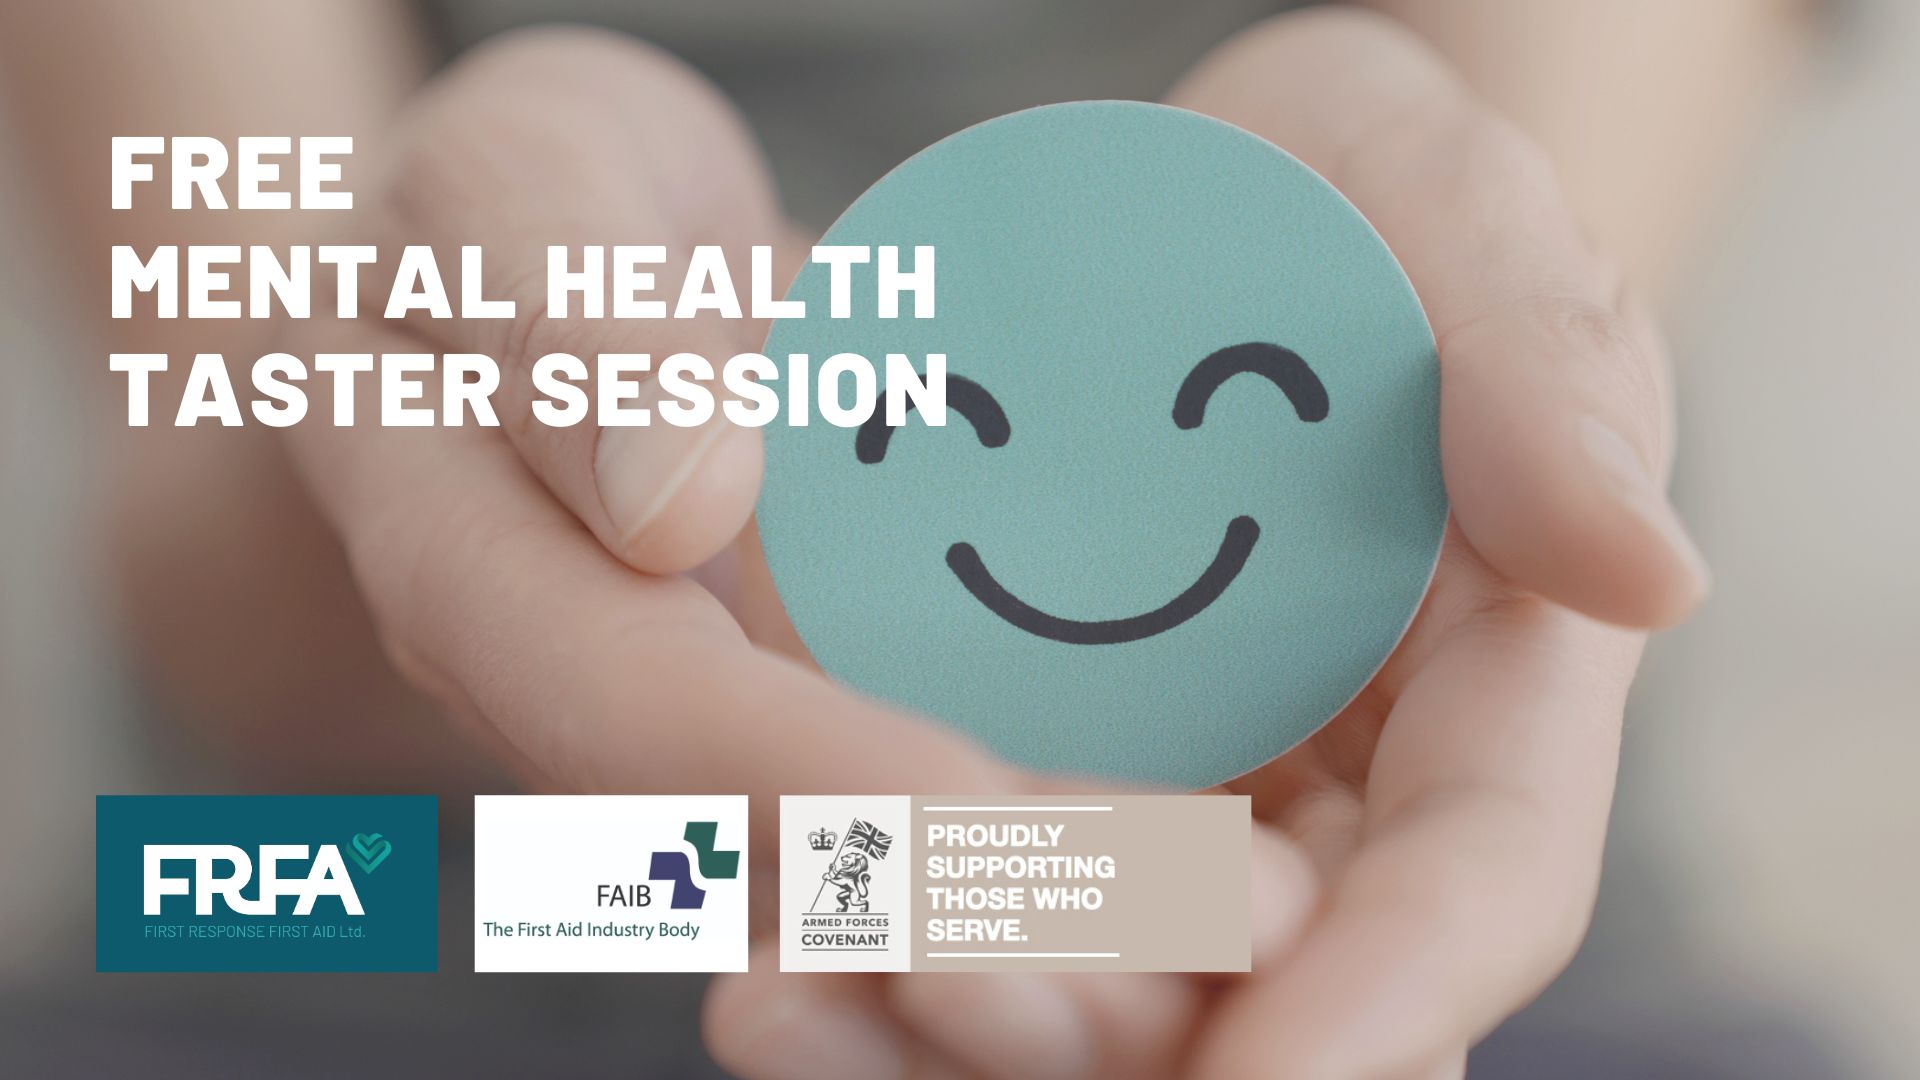 Training provider launches free online mental health first aid taster sessions